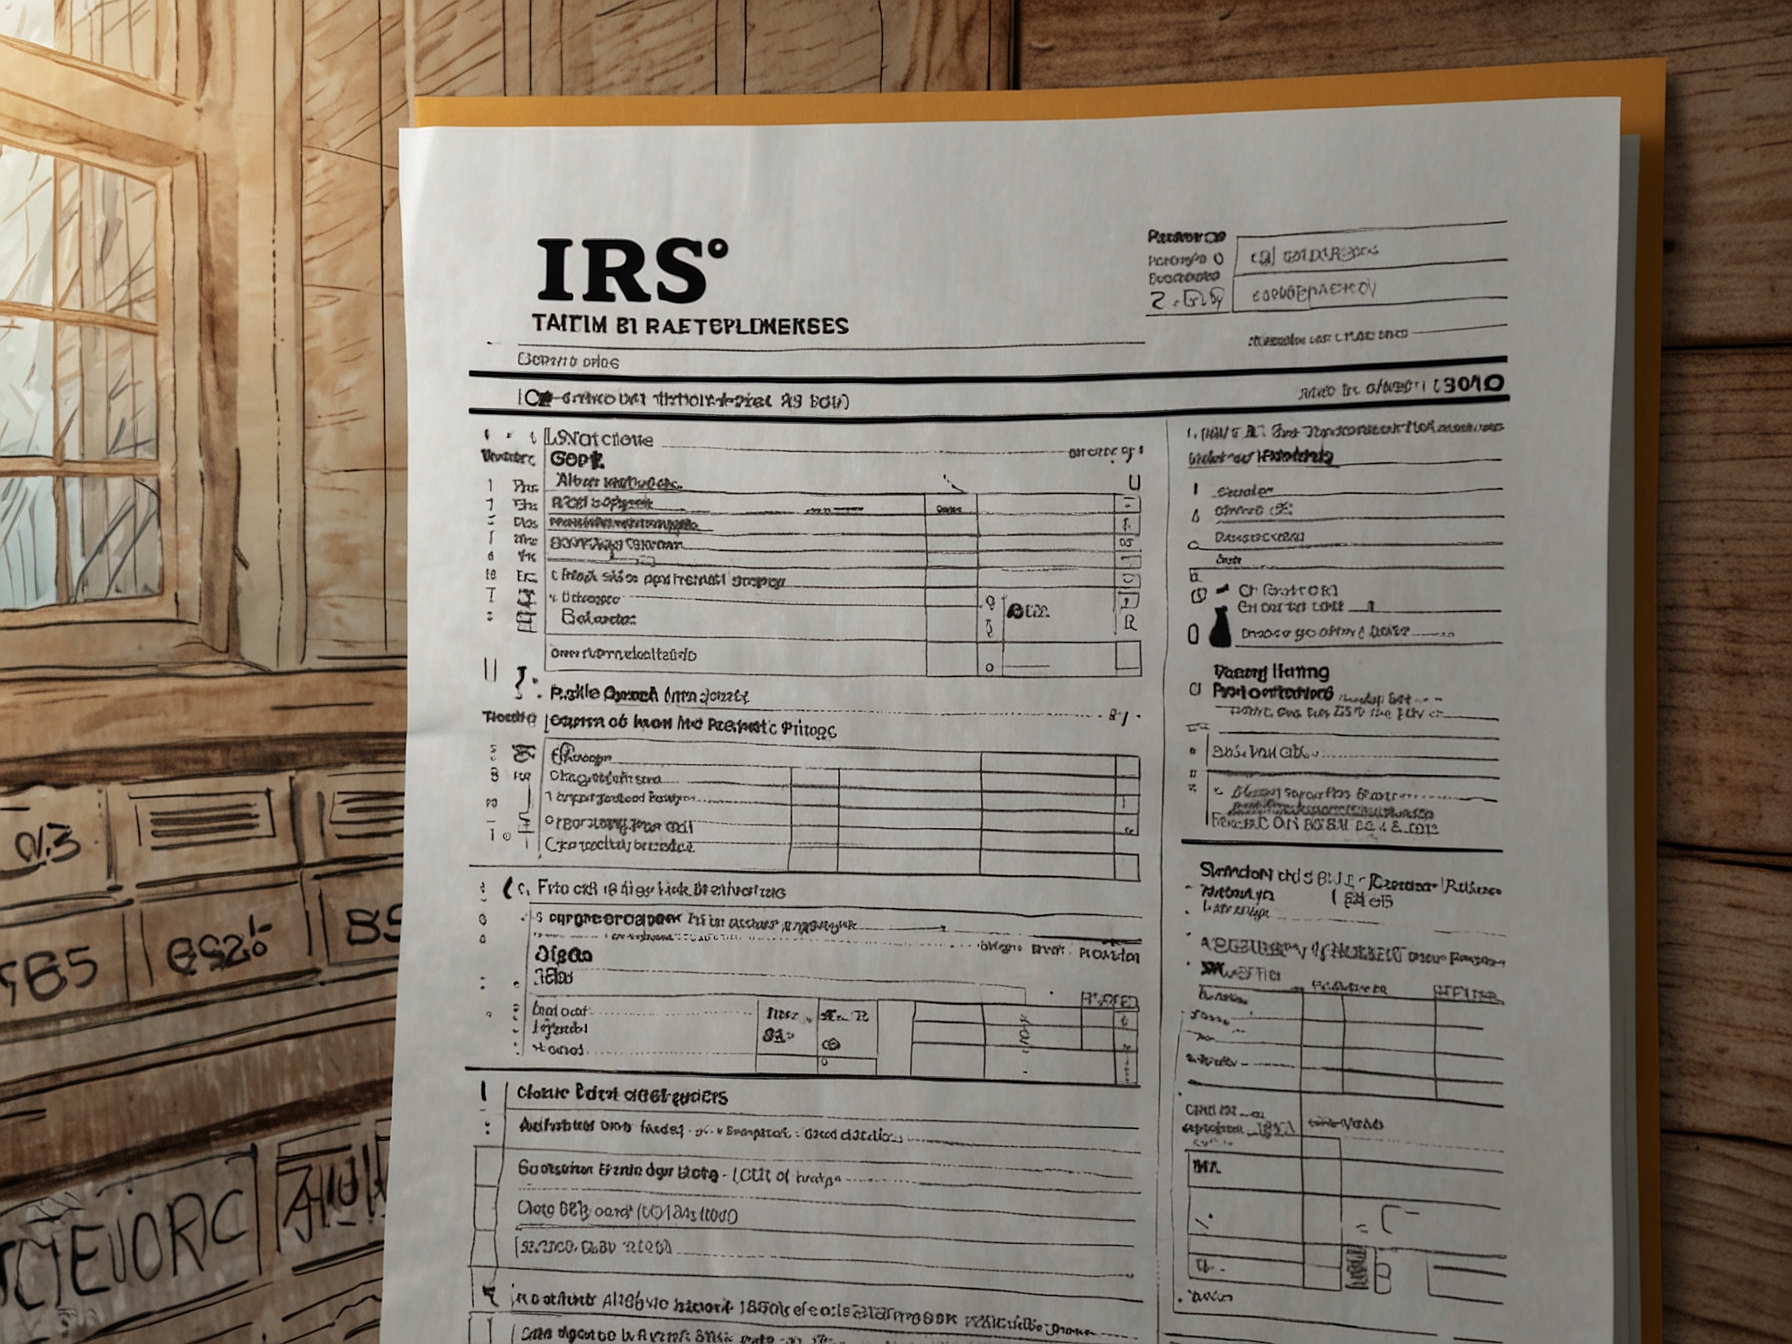 A graphic showing the IRS Form 1099-DA, which will be used by cryptocurrency brokers to report transactions, highlighting the integration of digital asset reporting into the tax system.